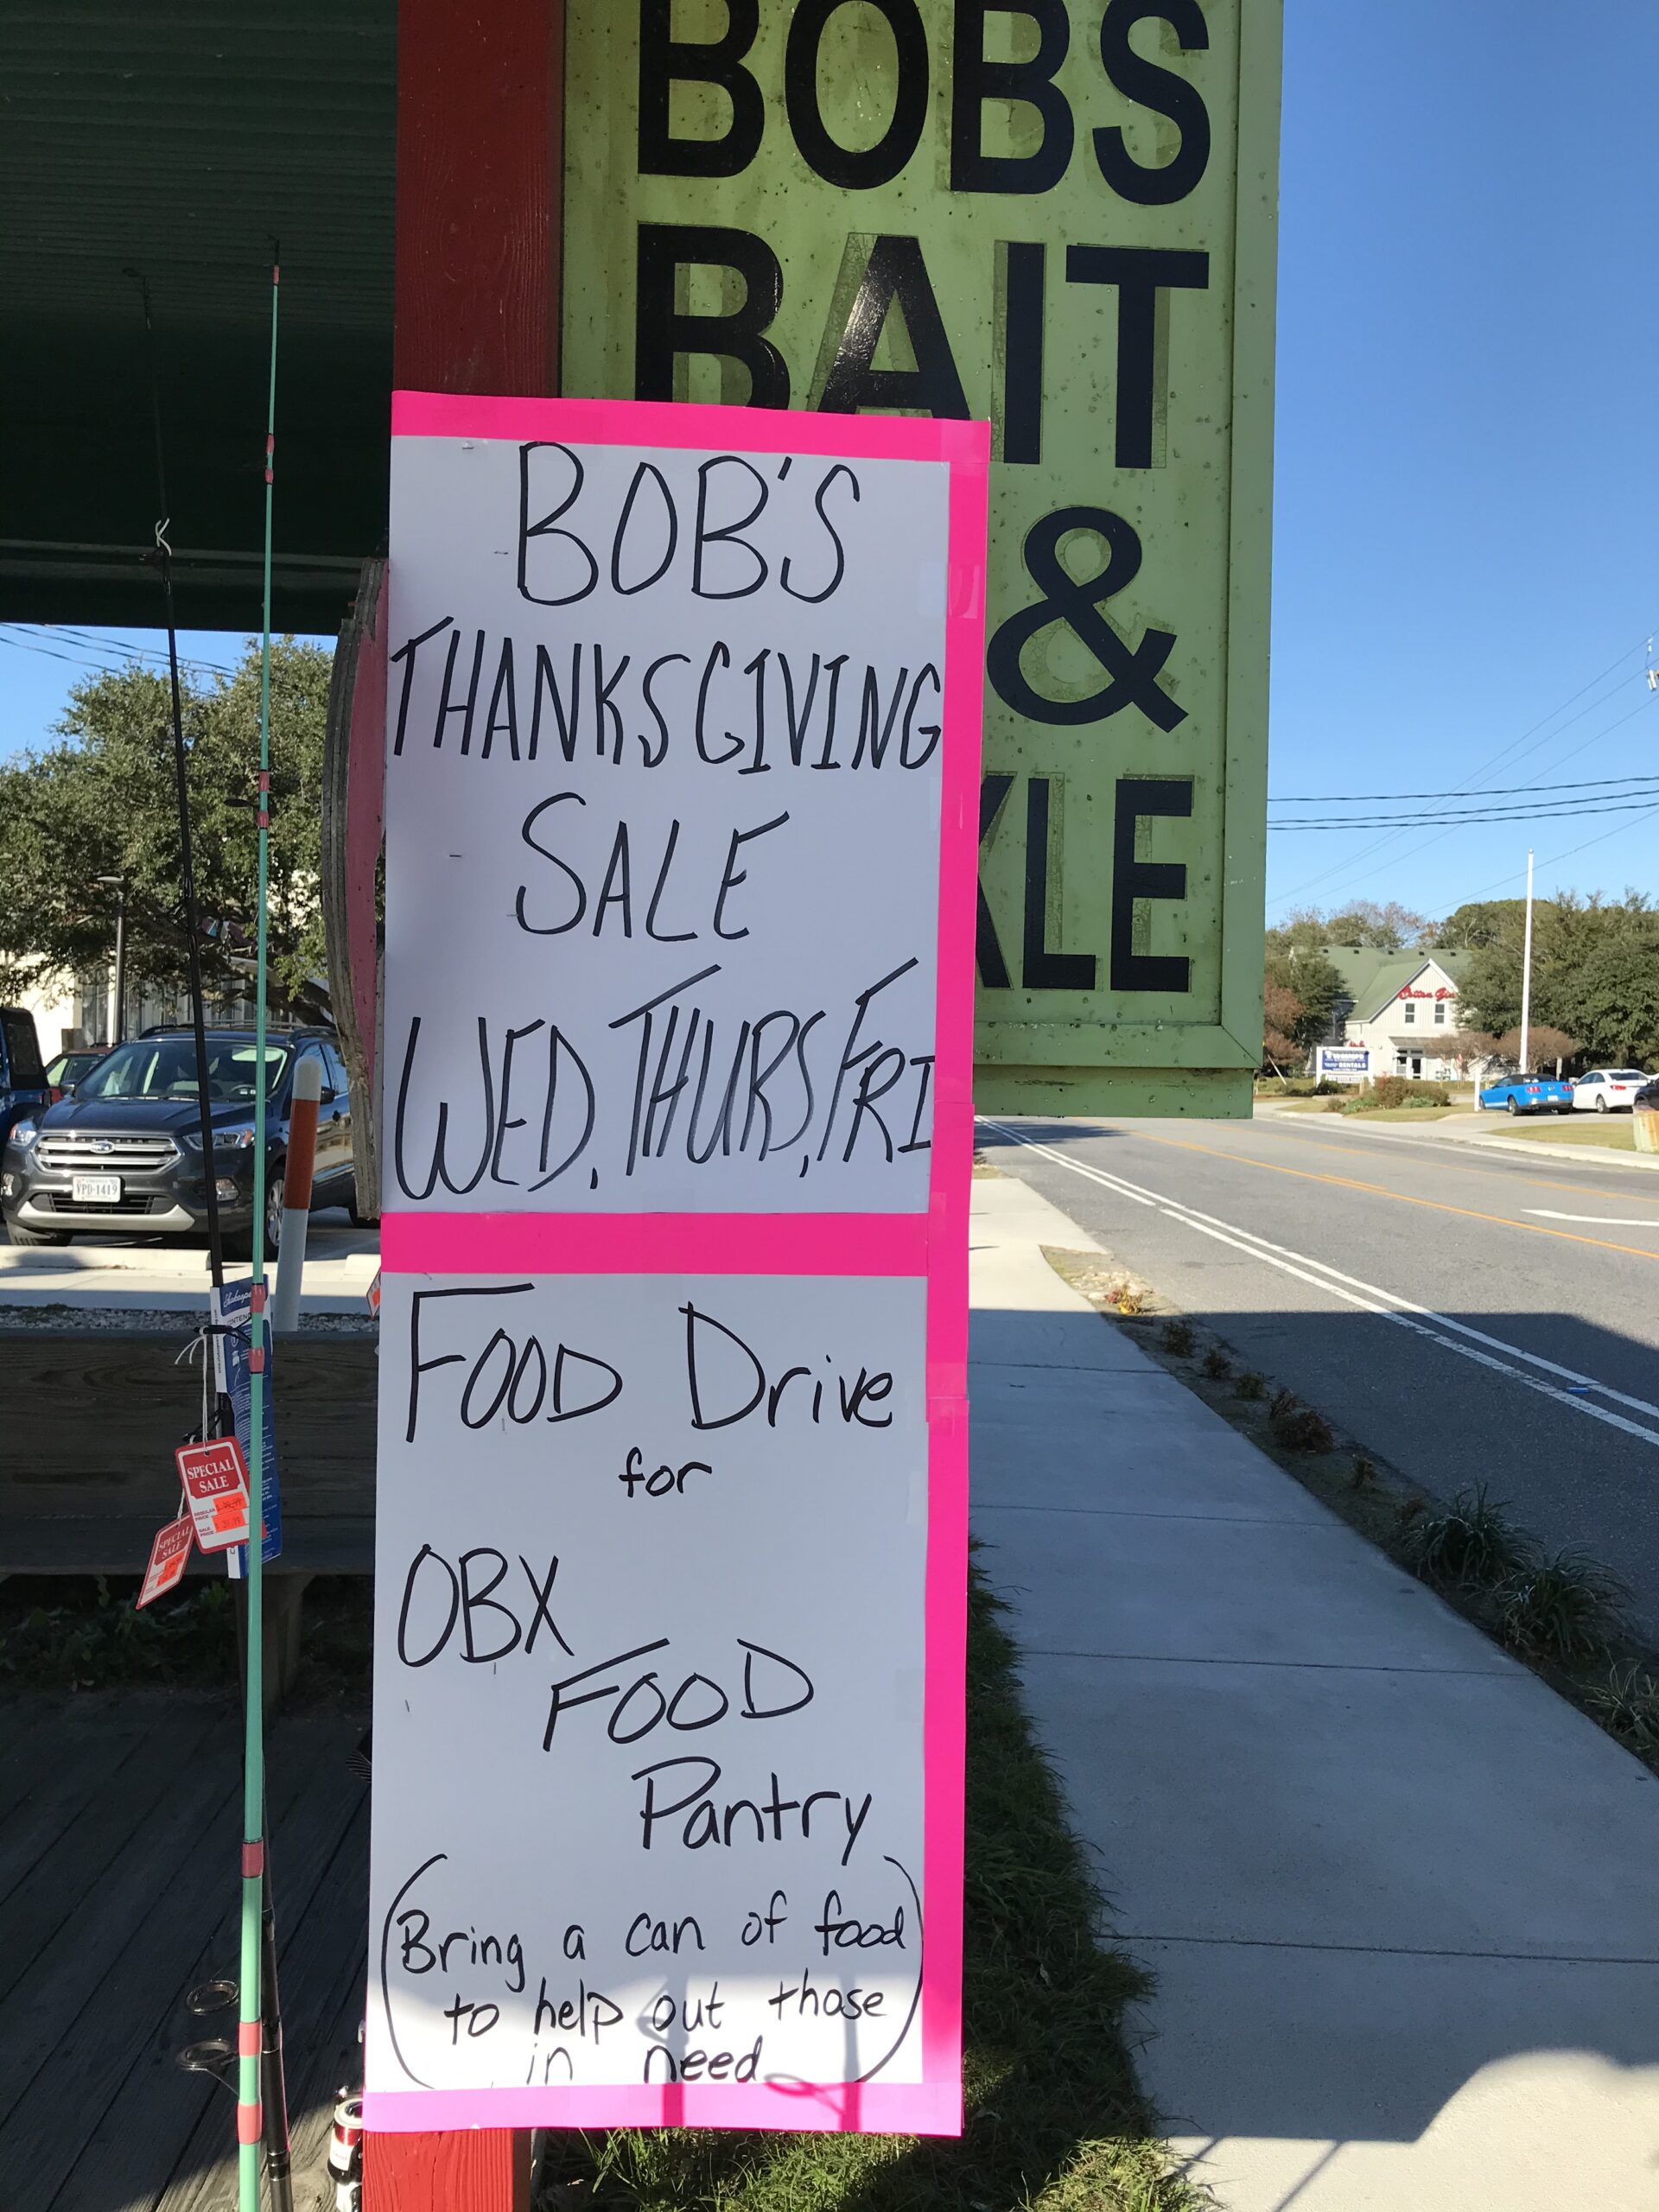 Bobs Bait And Tackle Outer Banks Sale and Food Pantry Fundraiser